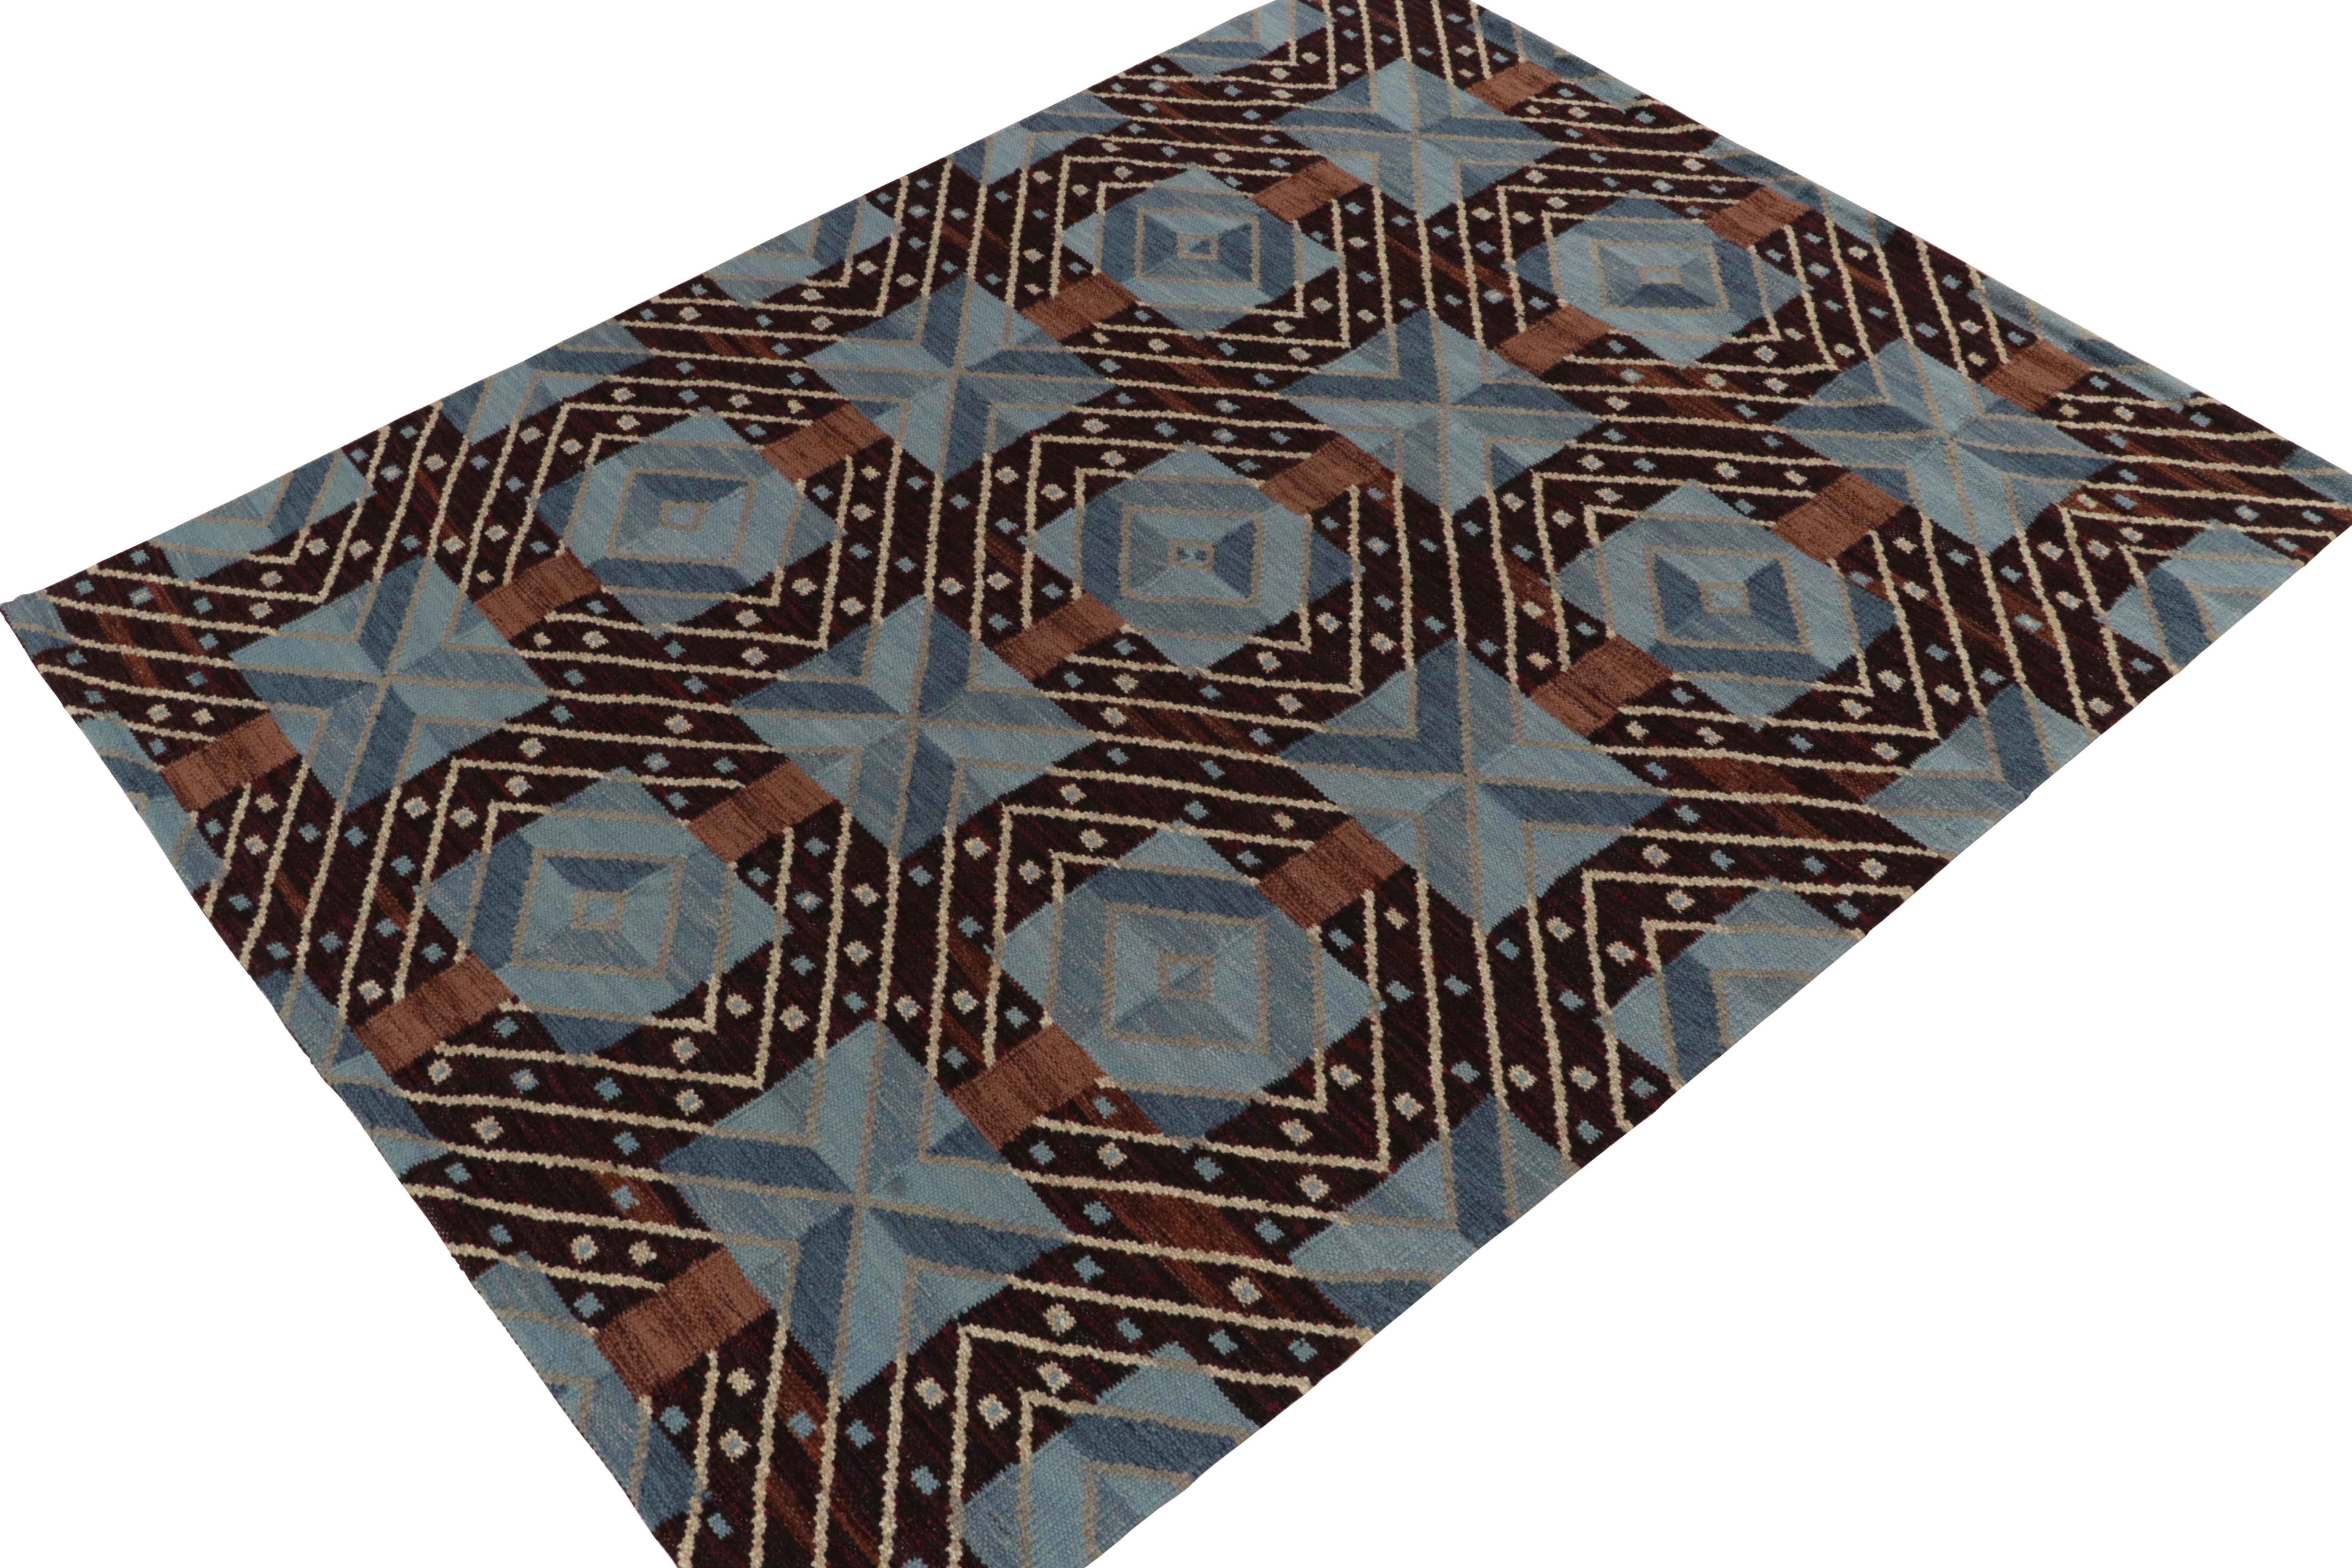 Boldly reimagining Swedish Deco sensibilities, this 8x10 Scandinavian Kilim enjoys a defined geometric pattern in smart repetition in a cool, soothing play of blue & brown. Keen eyes may note a series of undyed natural yarns in the handwoven wool; a